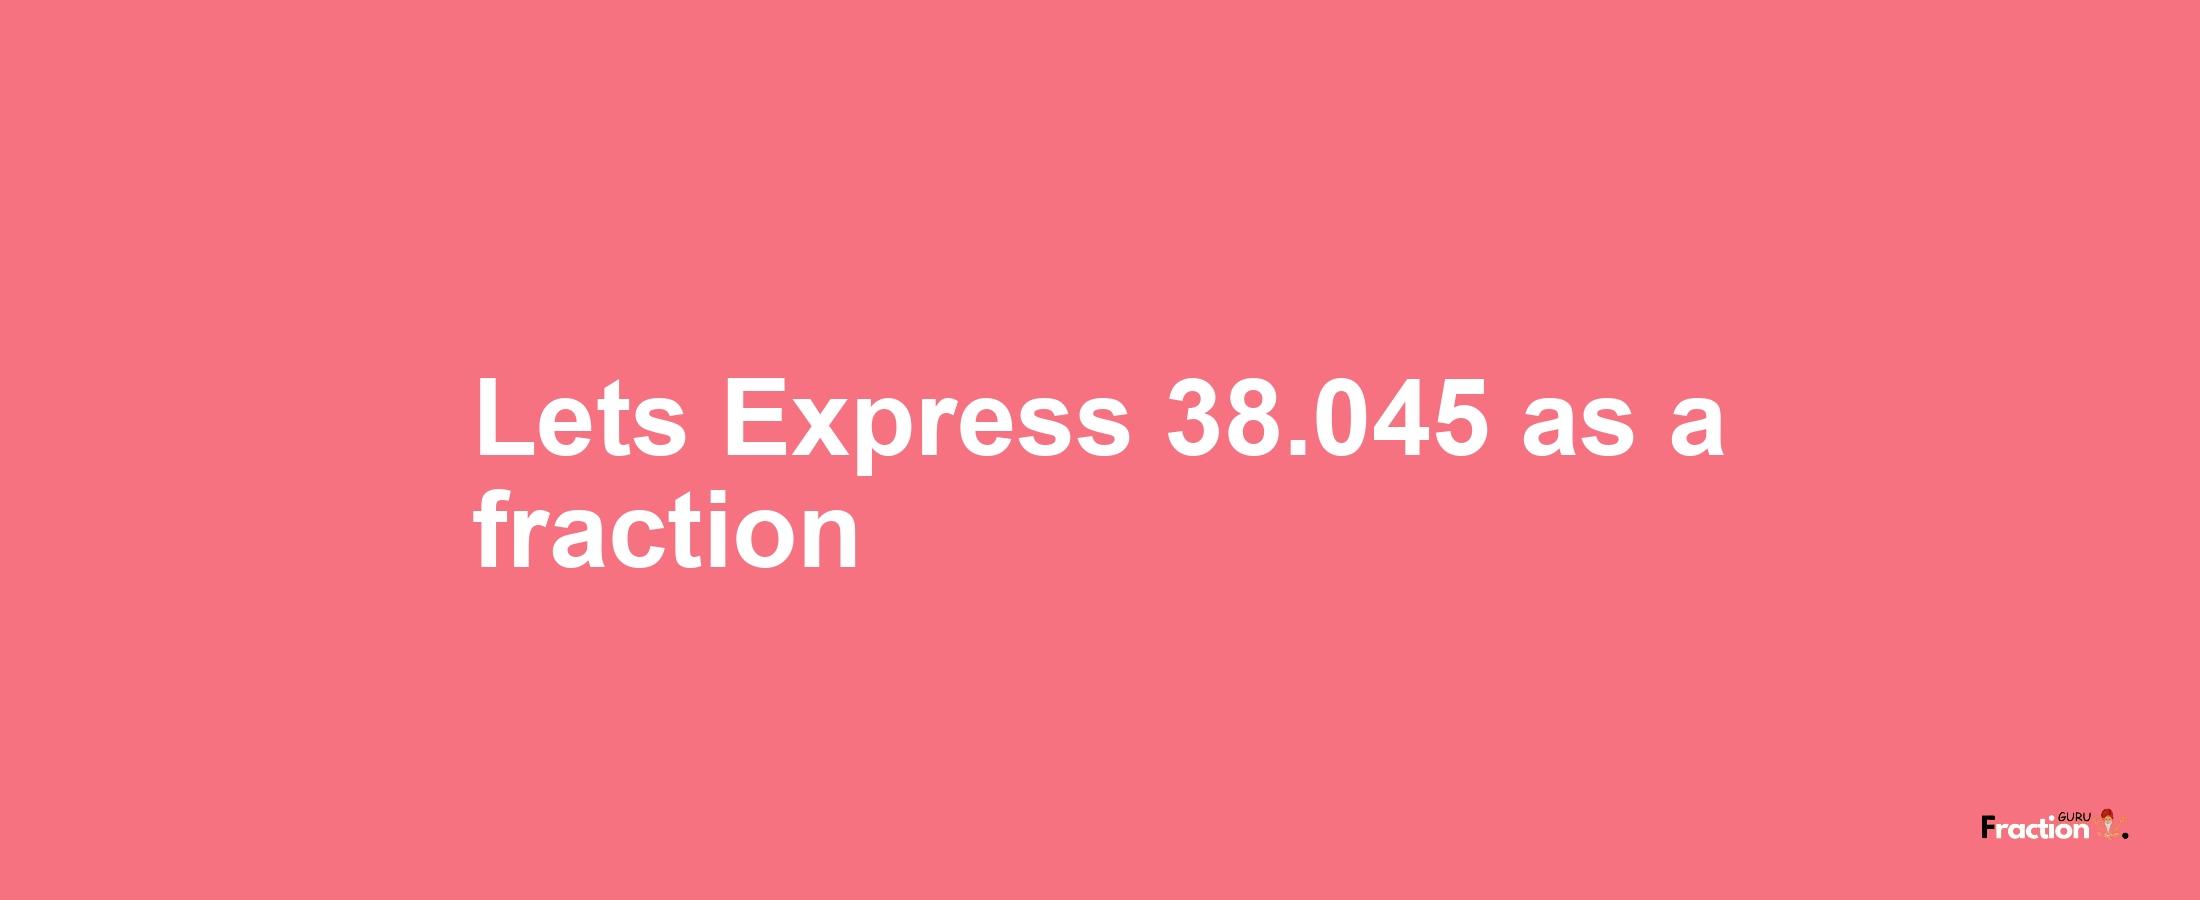 Lets Express 38.045 as afraction